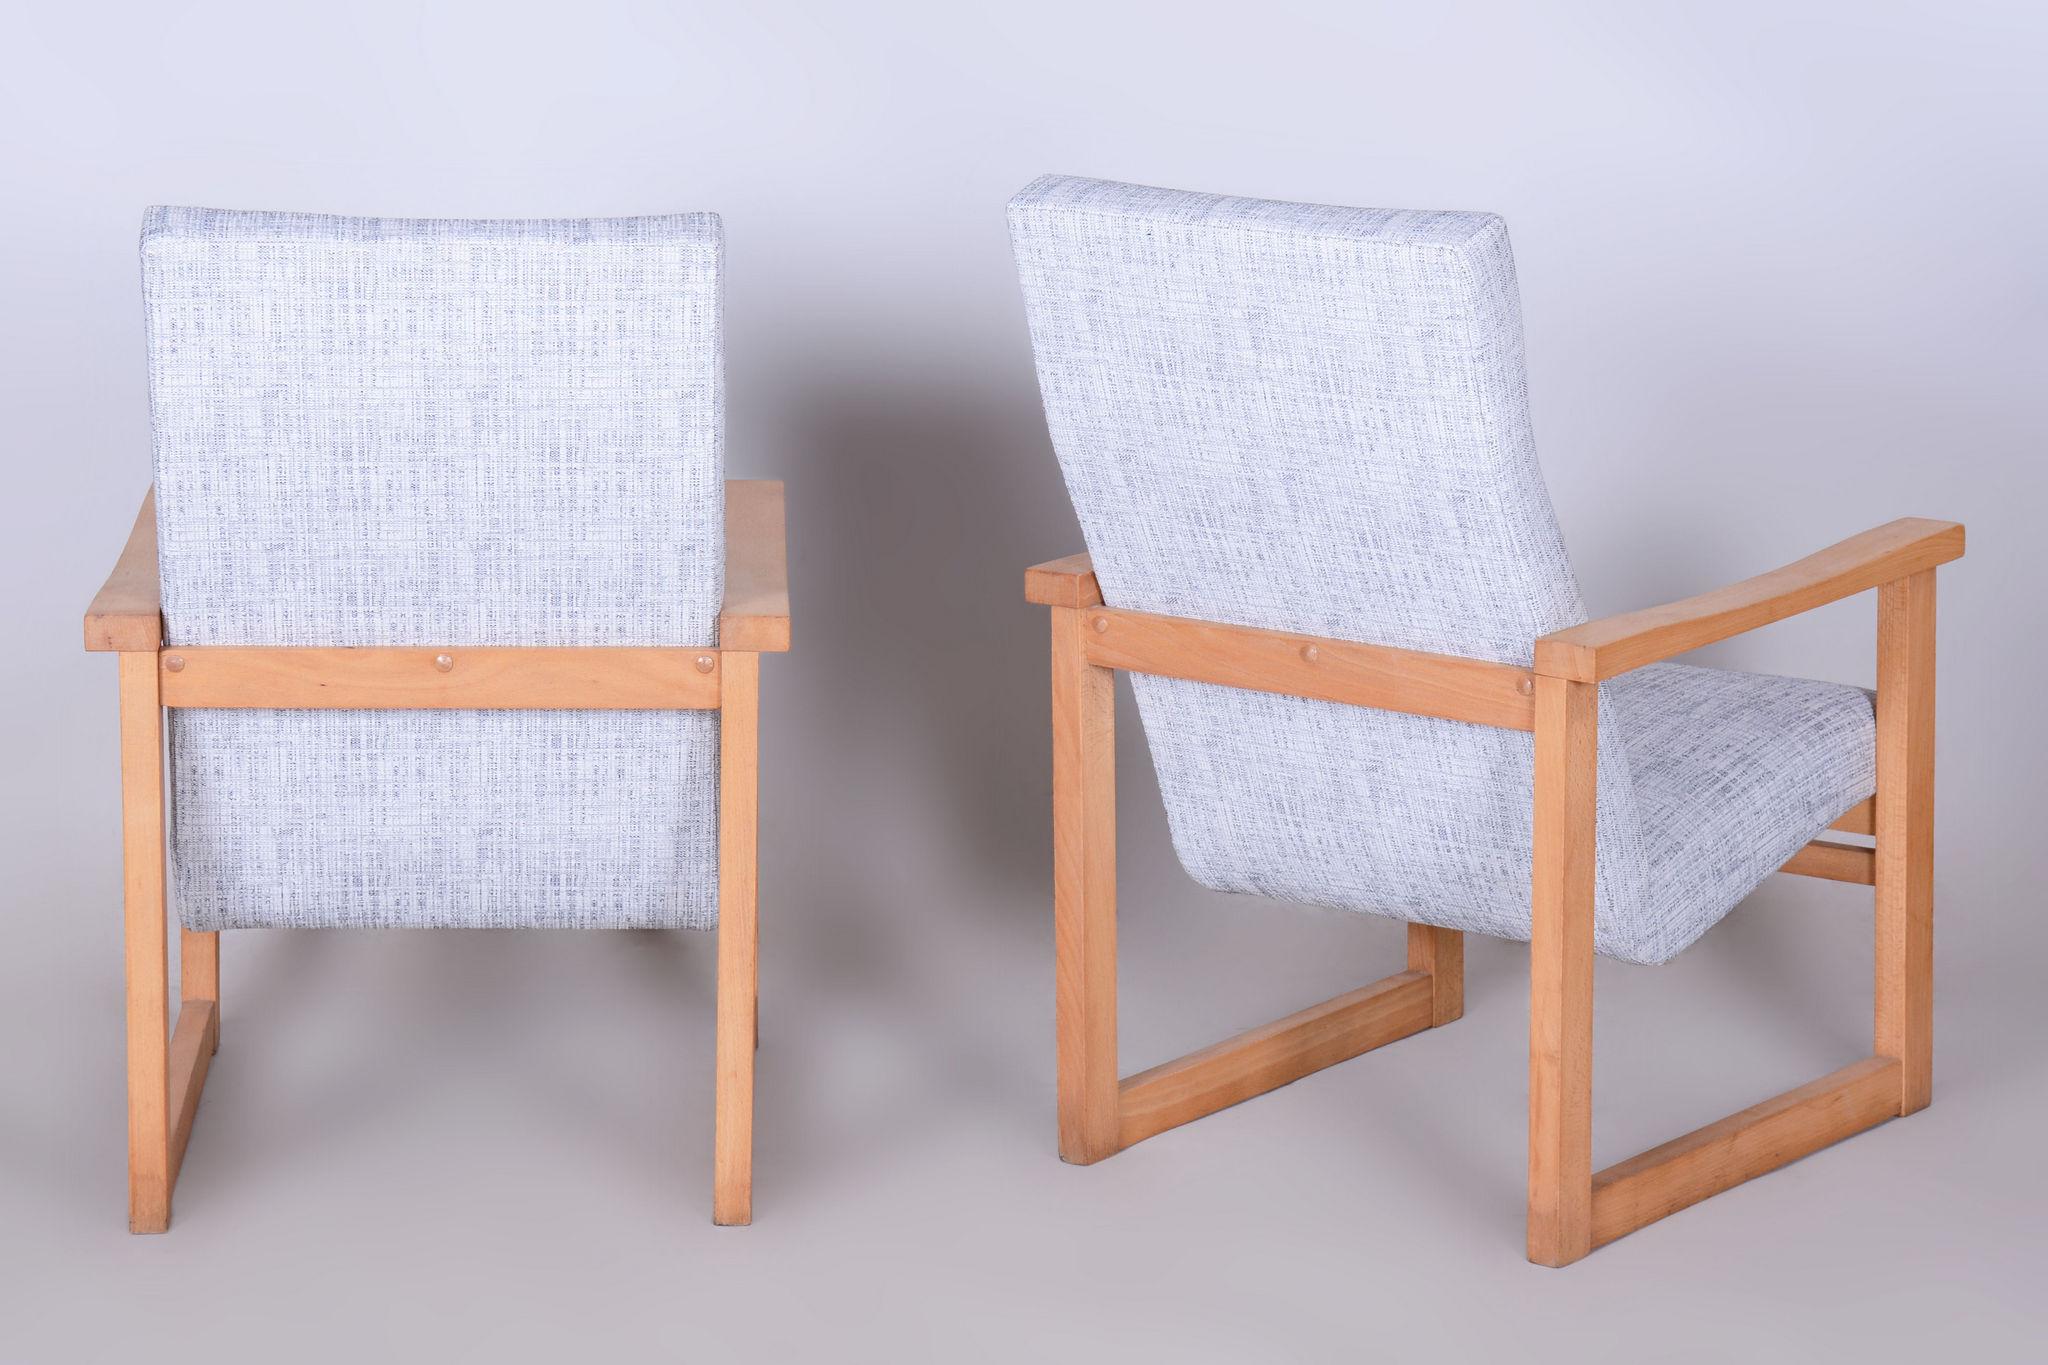 Pair of Restored Mid-Century Armchairs, Beech, New Upholstery, Czech, 1960s For Sale 1